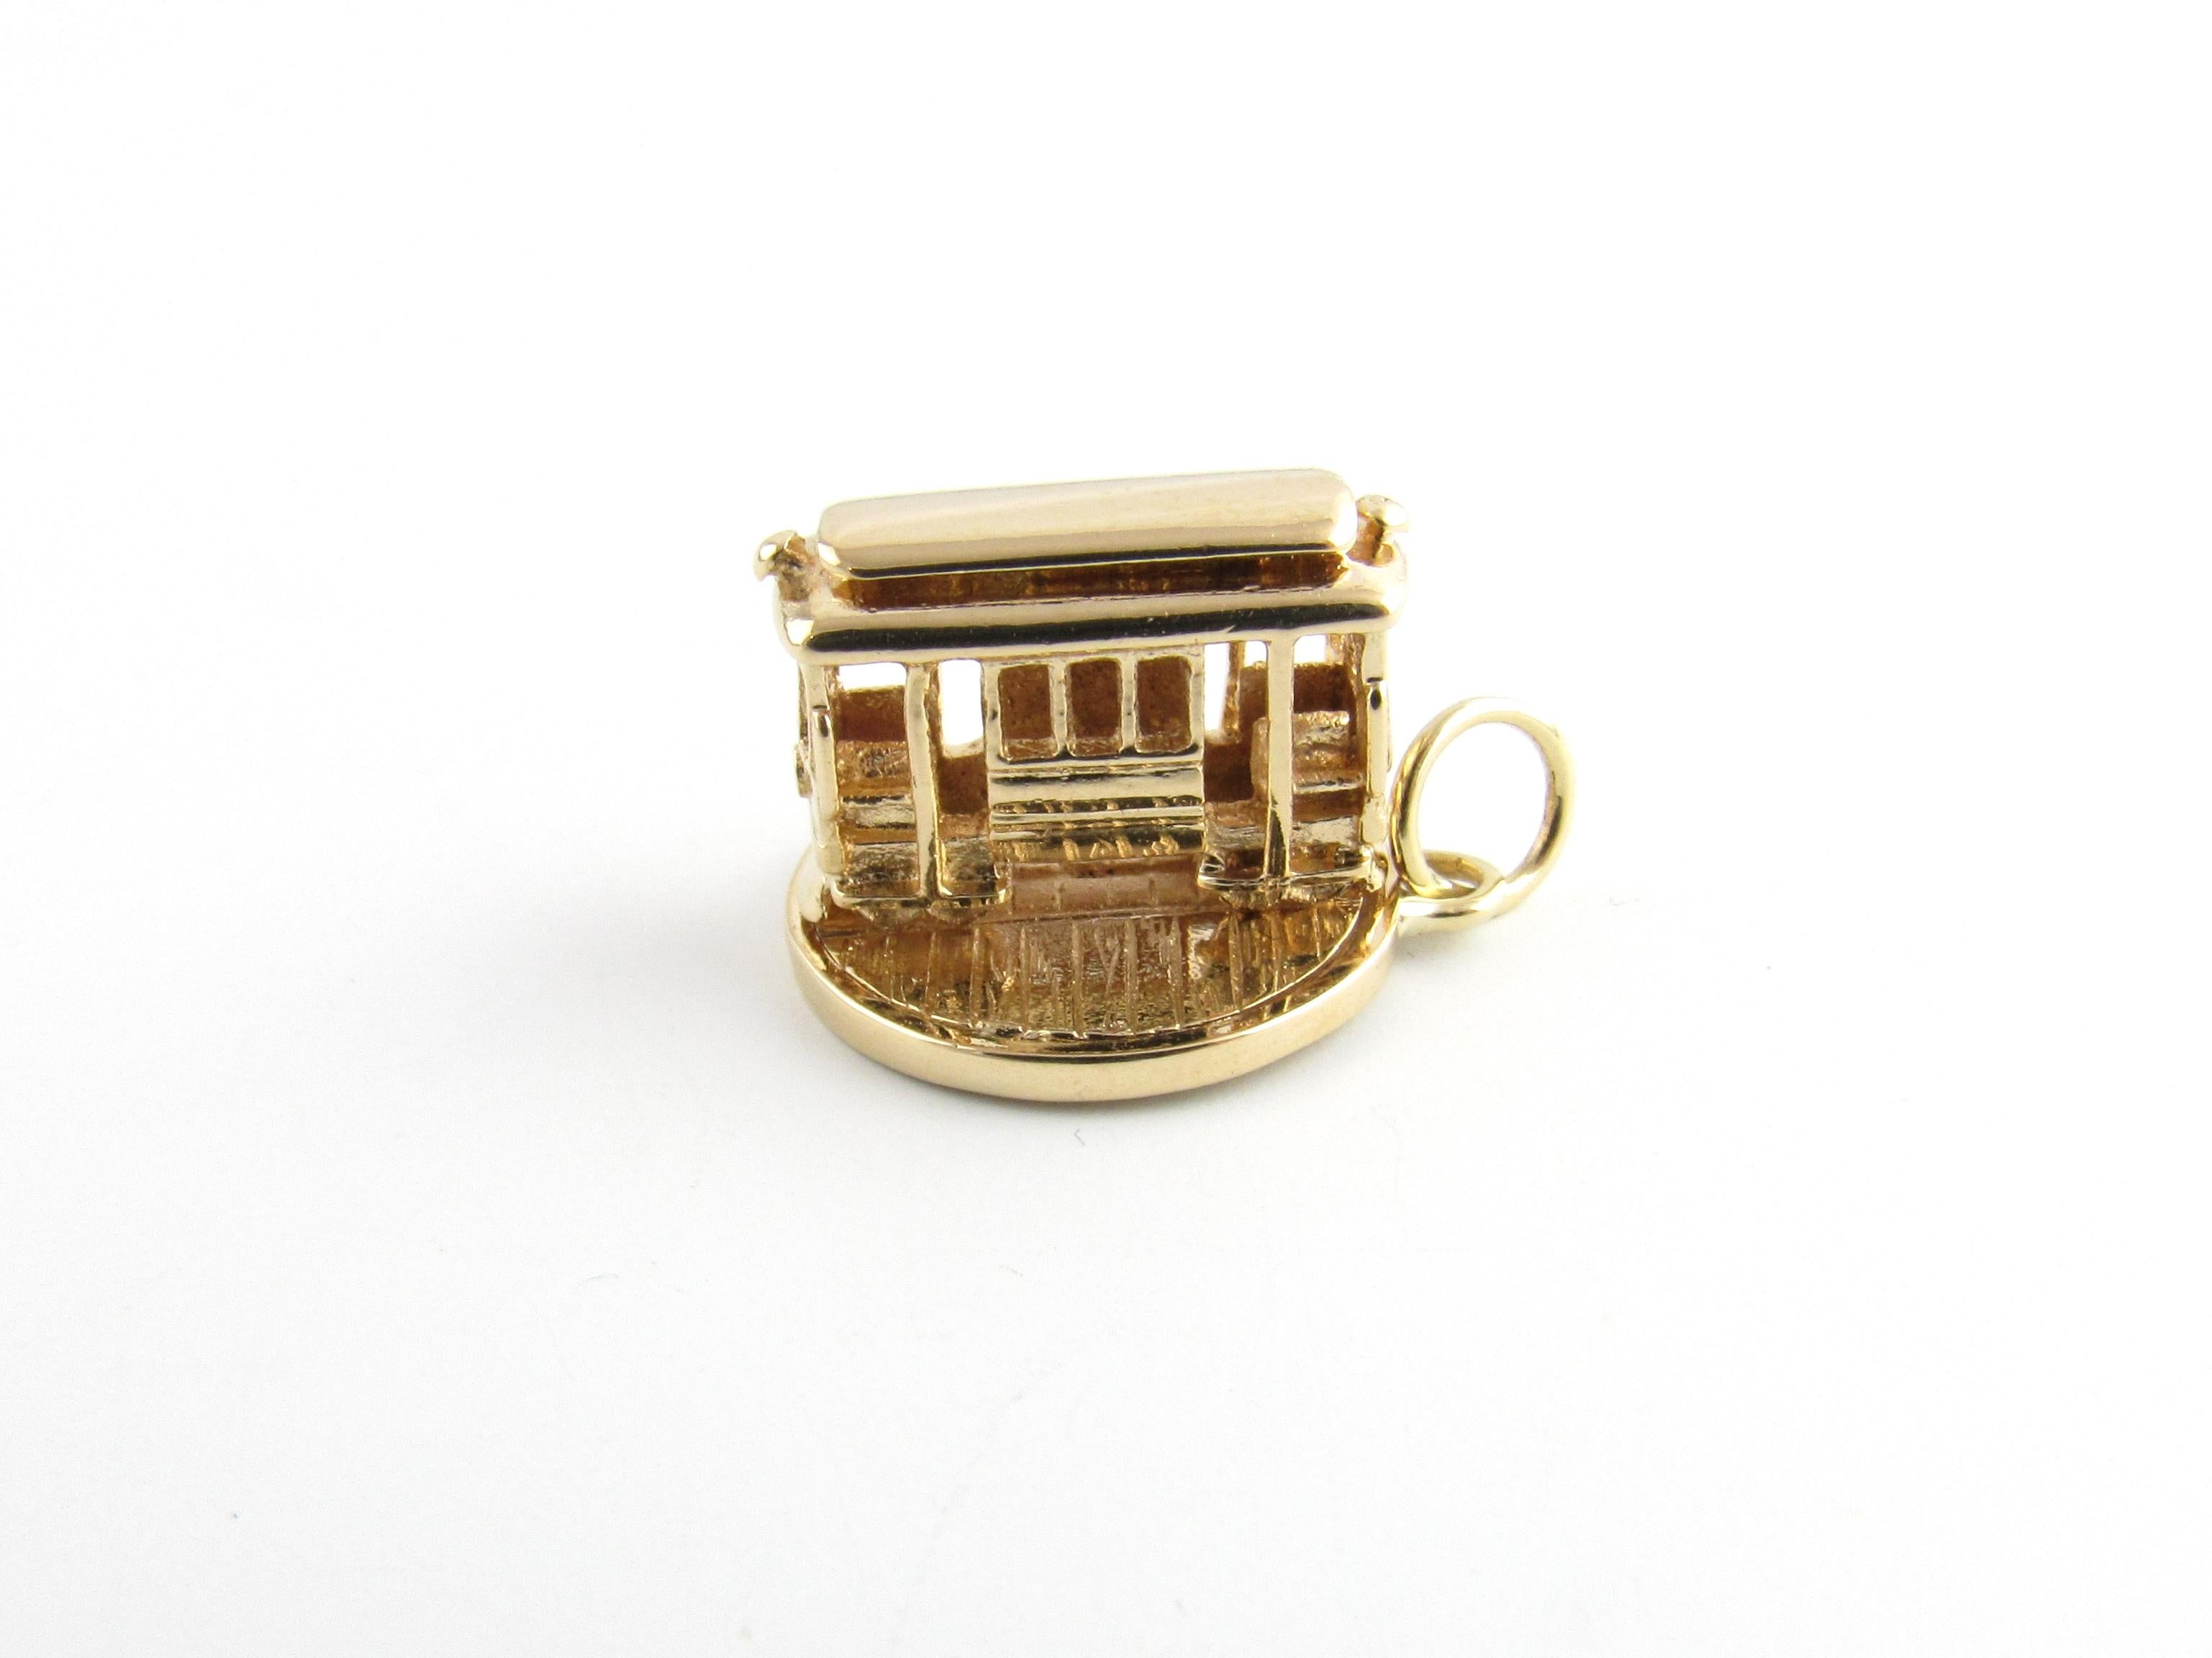 Vintage 14 Karat Yellow Gold Rotating Trolley Car Charm-

Take a ride on the cable car!

This lovely 3D charm features a miniature cable car that rotates on its base. Beautifully detailed in 14K yellow gold.

Size: 12 mm 16 mm (actual